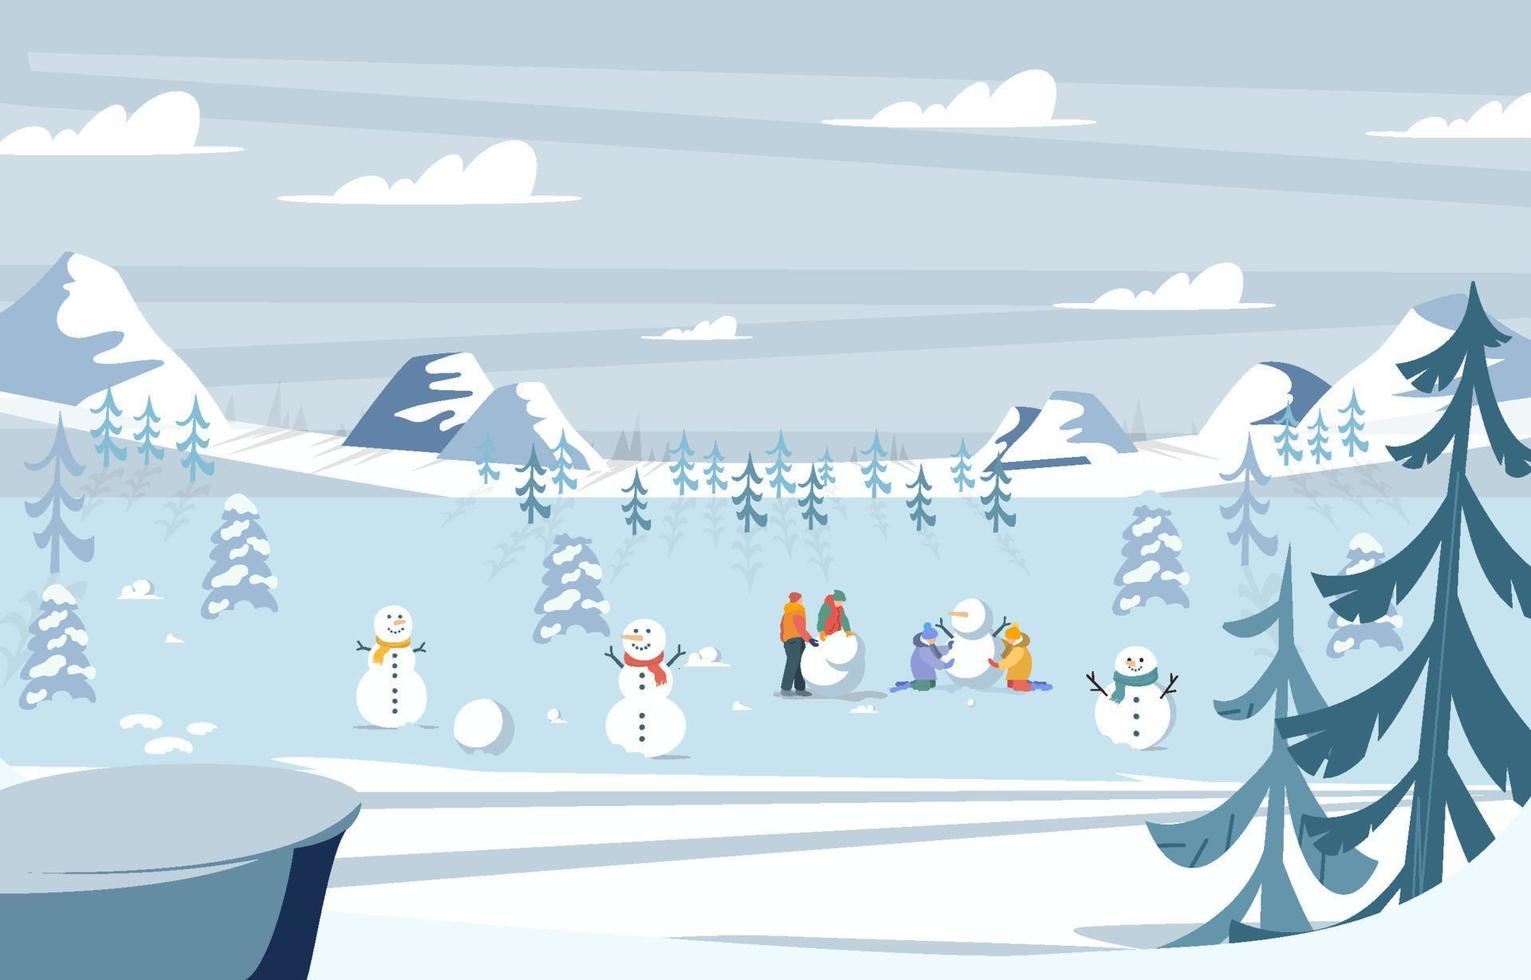 People Making Snowmans In Winter Background vector